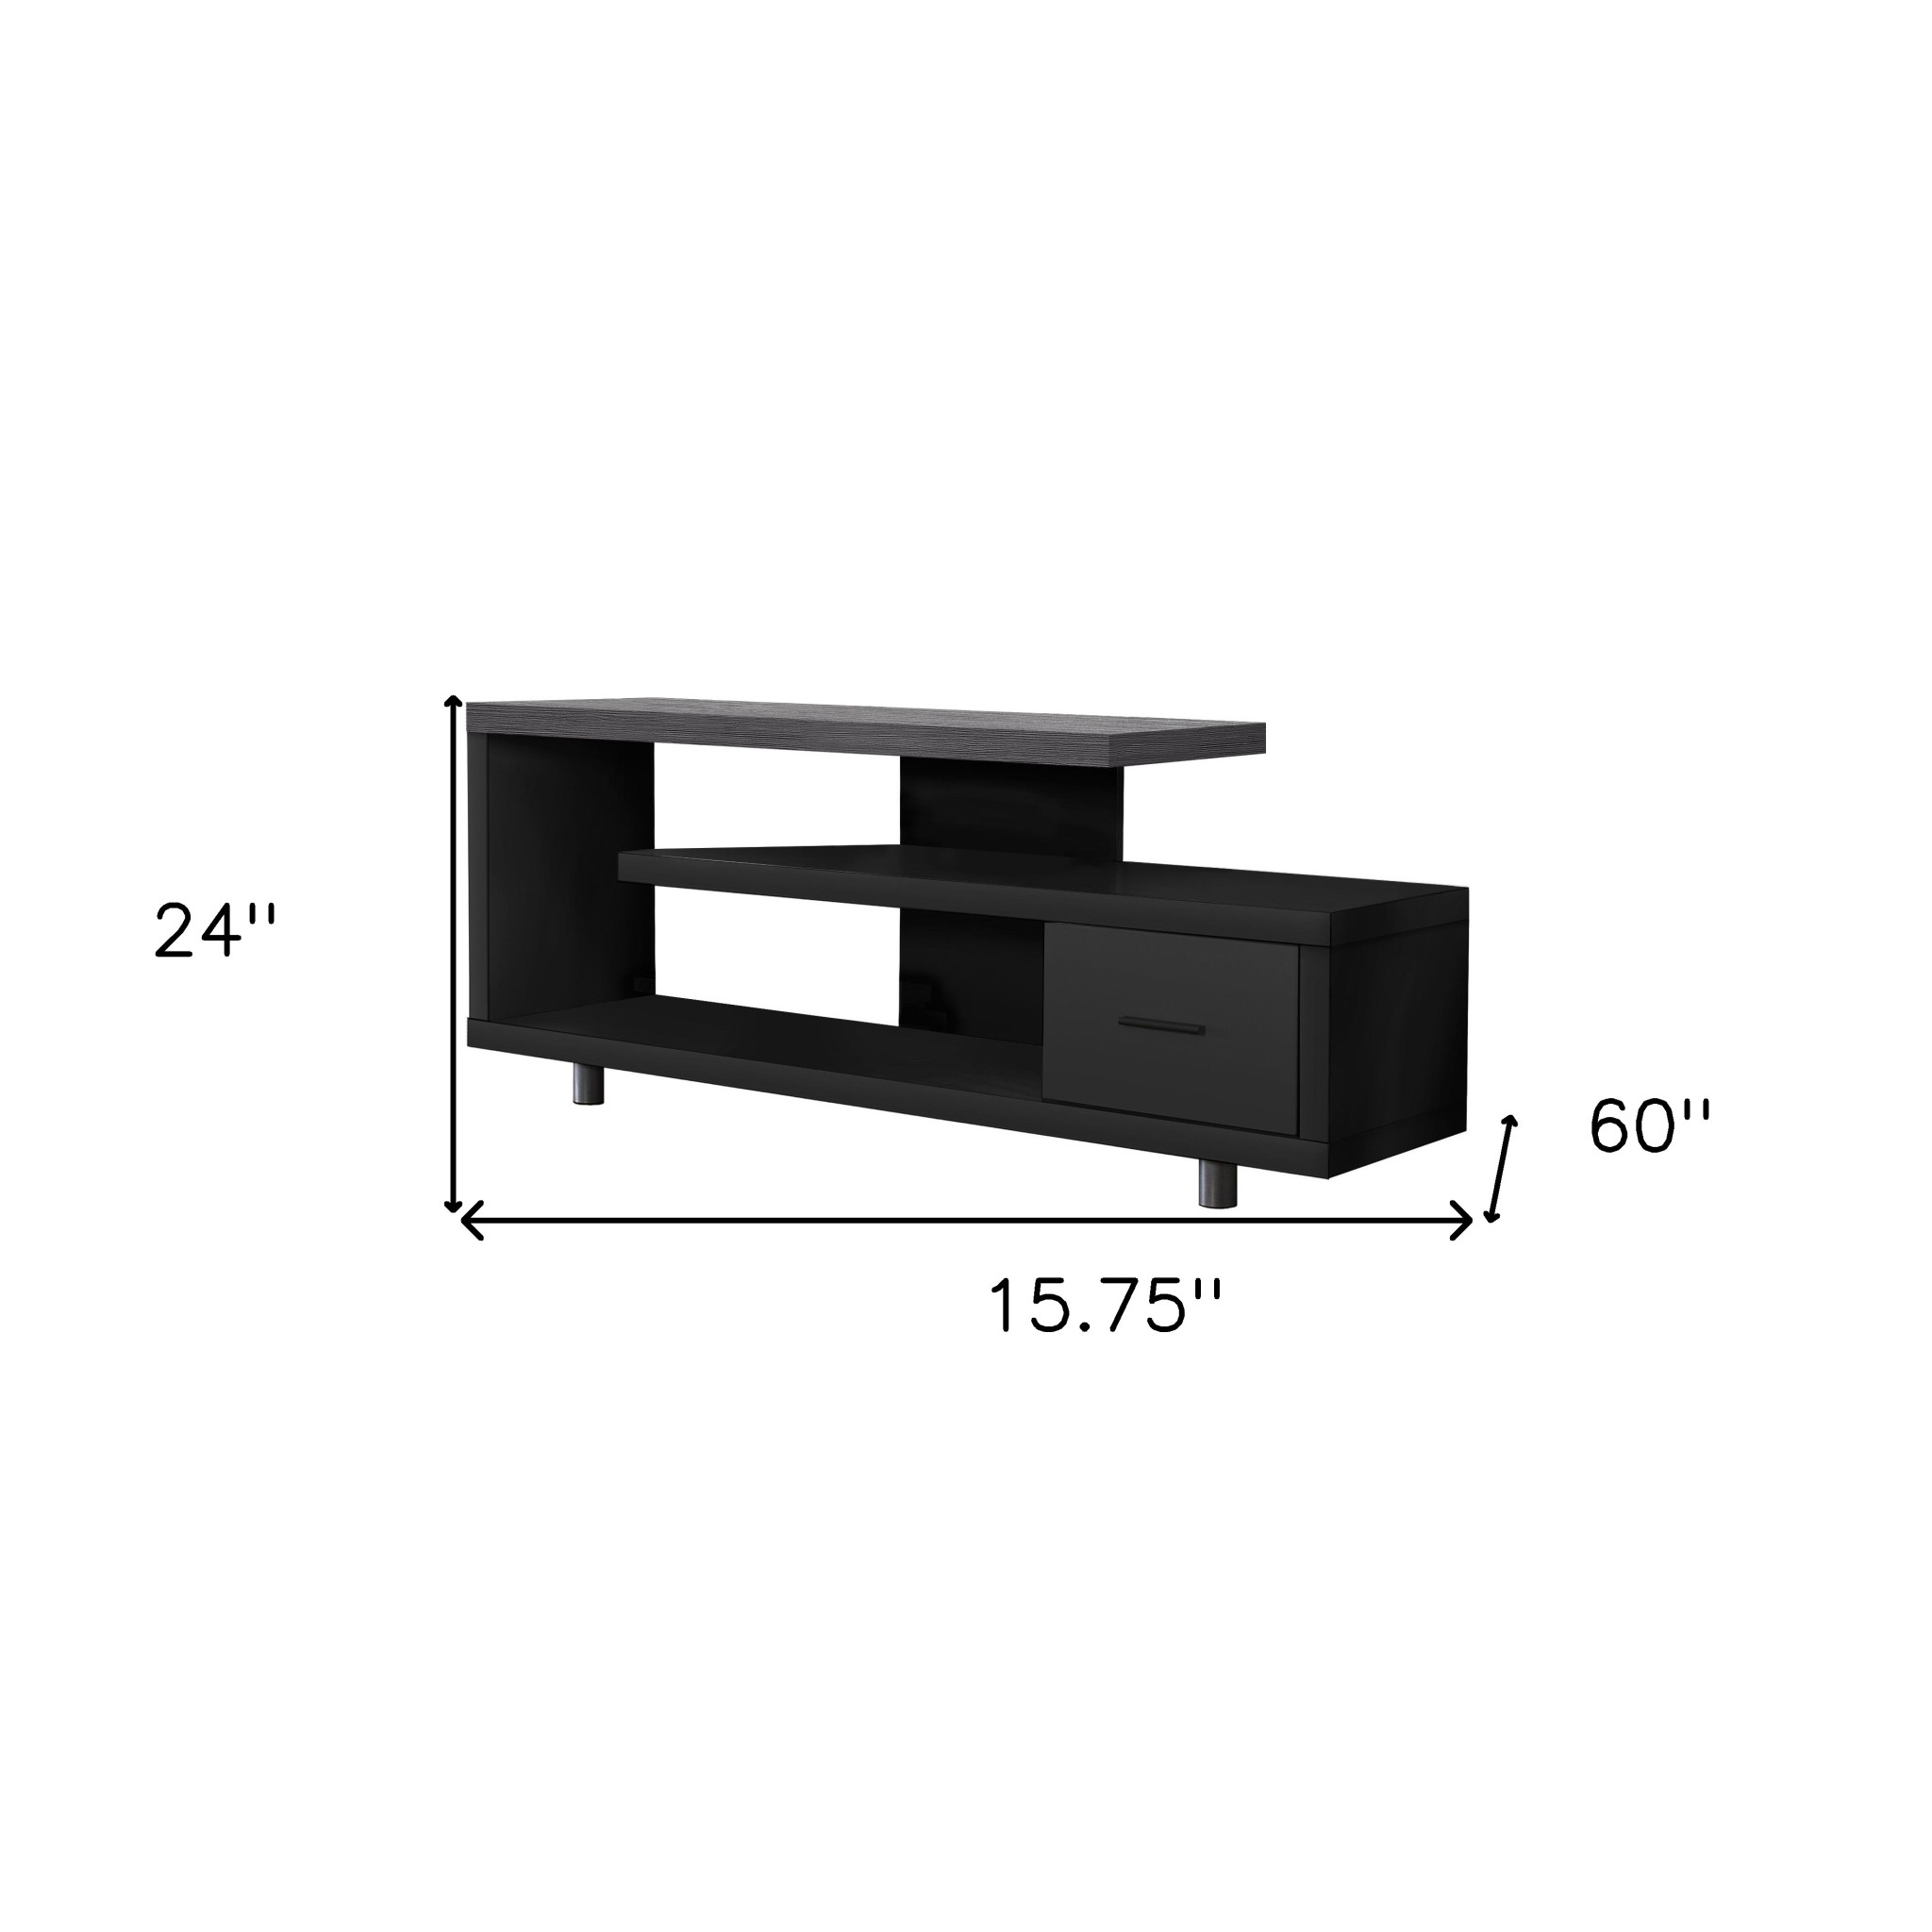 15.75" x 60" x 24" Black Grey Particle Board Hollow Core Metal TV Stand with a Drawer